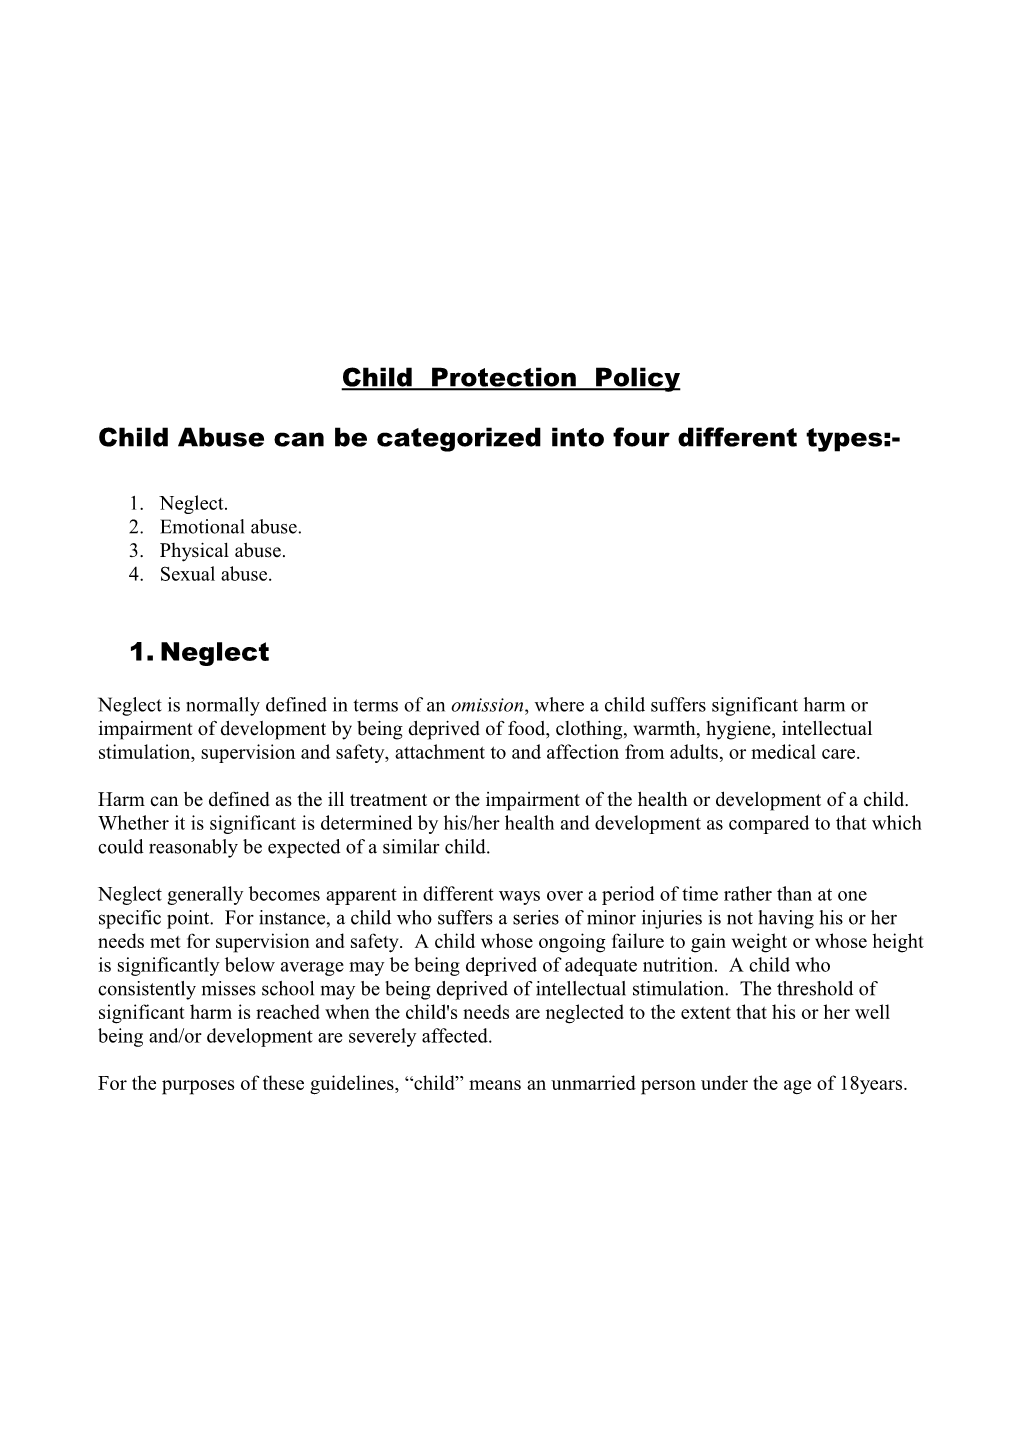 Child Abuse Can Be Categorized Into Four Different Types